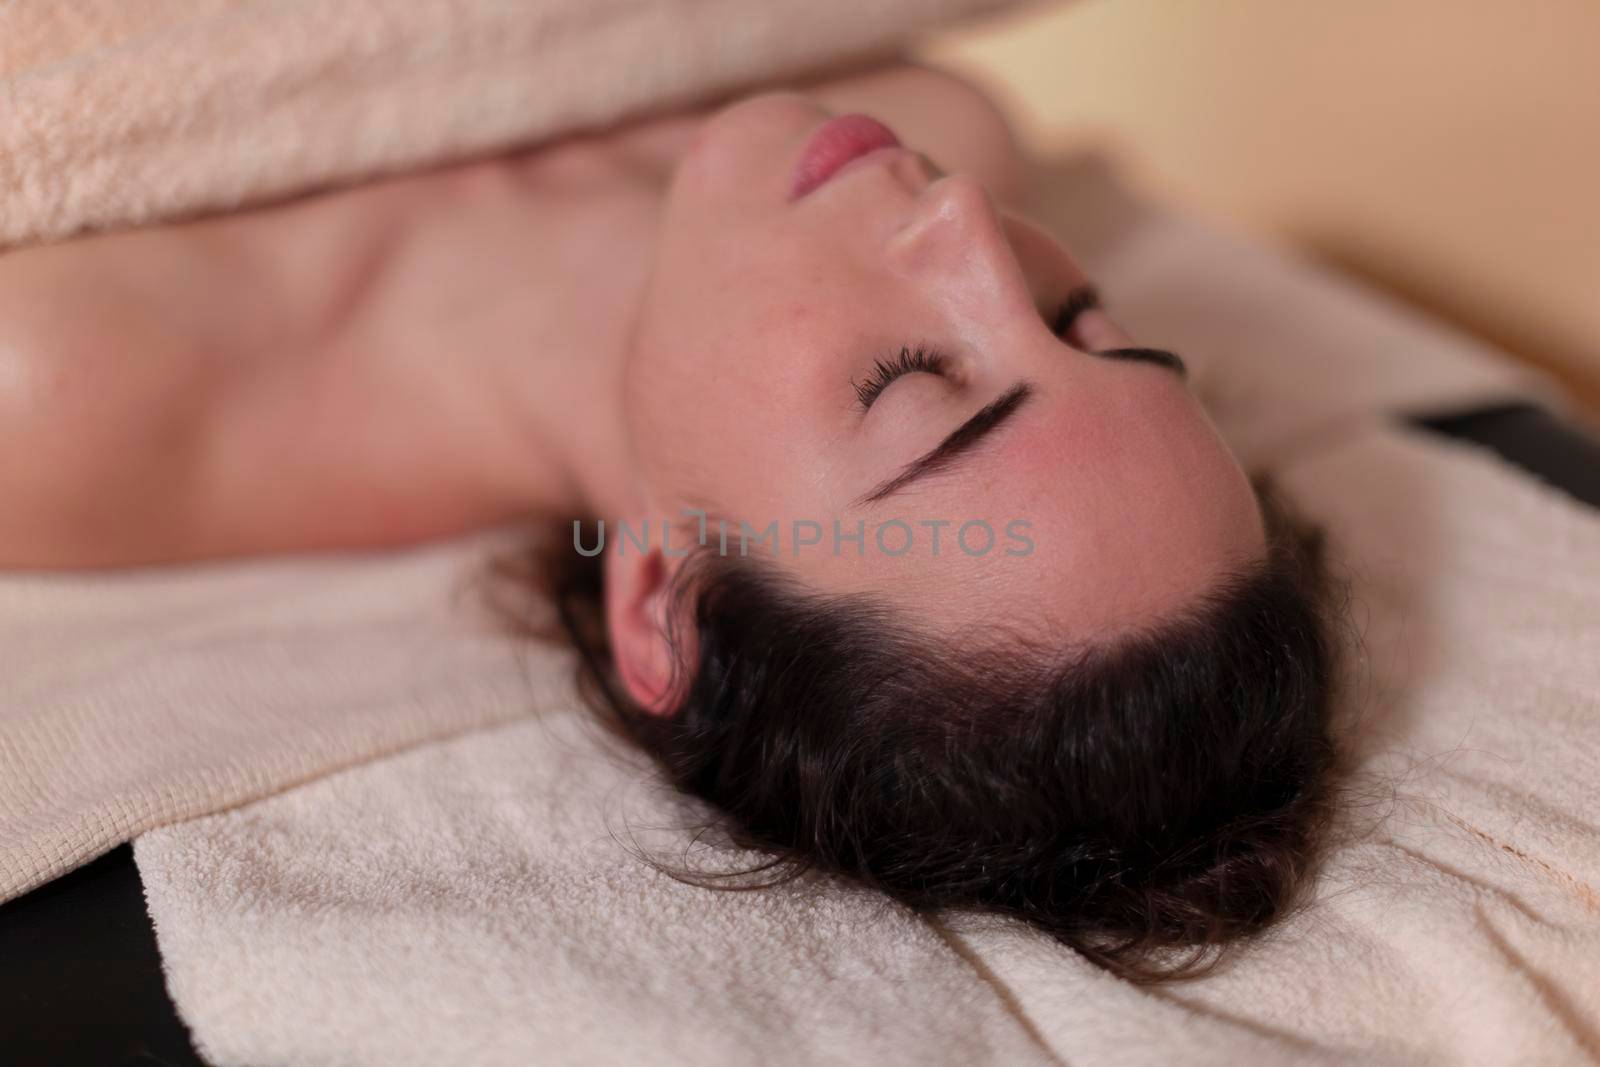 A patient lies relaxed on the massage table by stockrojoverdeyazul